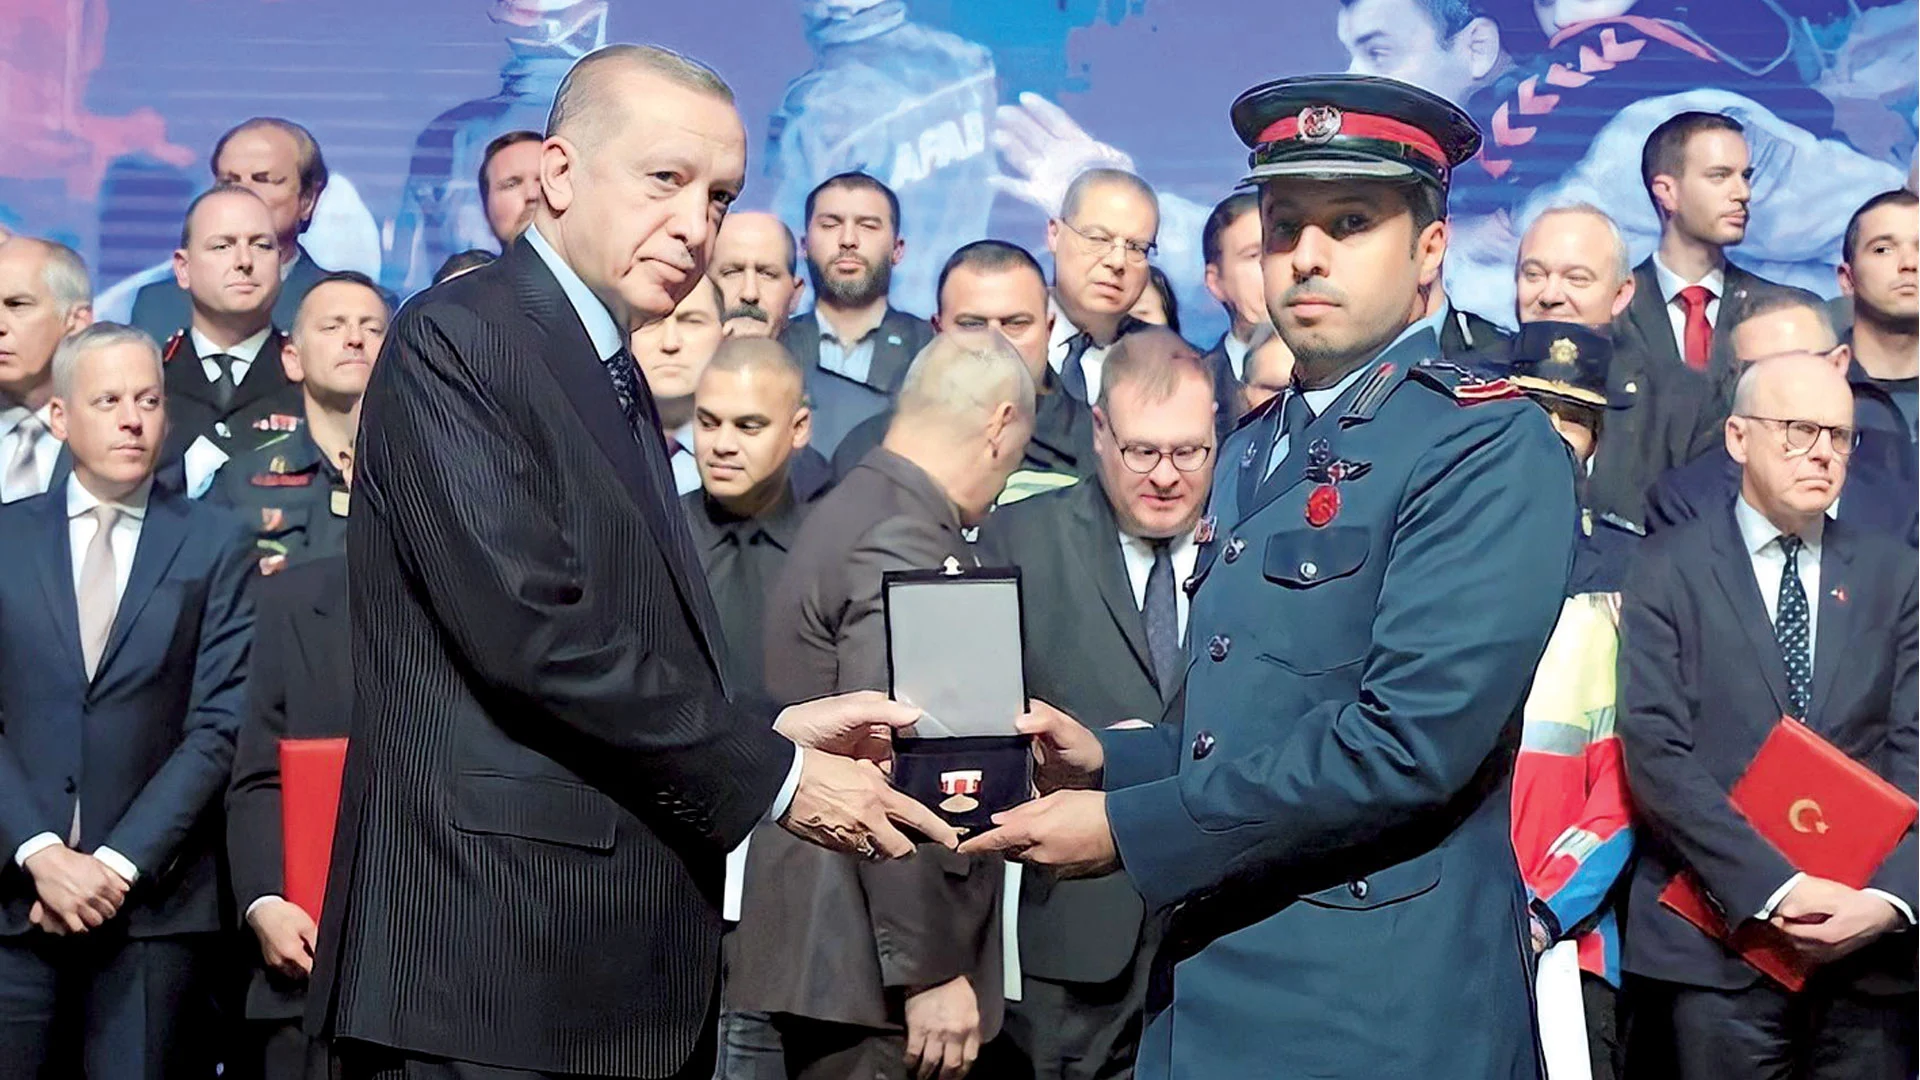 Turkish President Awards Medal of Supreme Sacrifice to Qatar International Search and Rescue Group